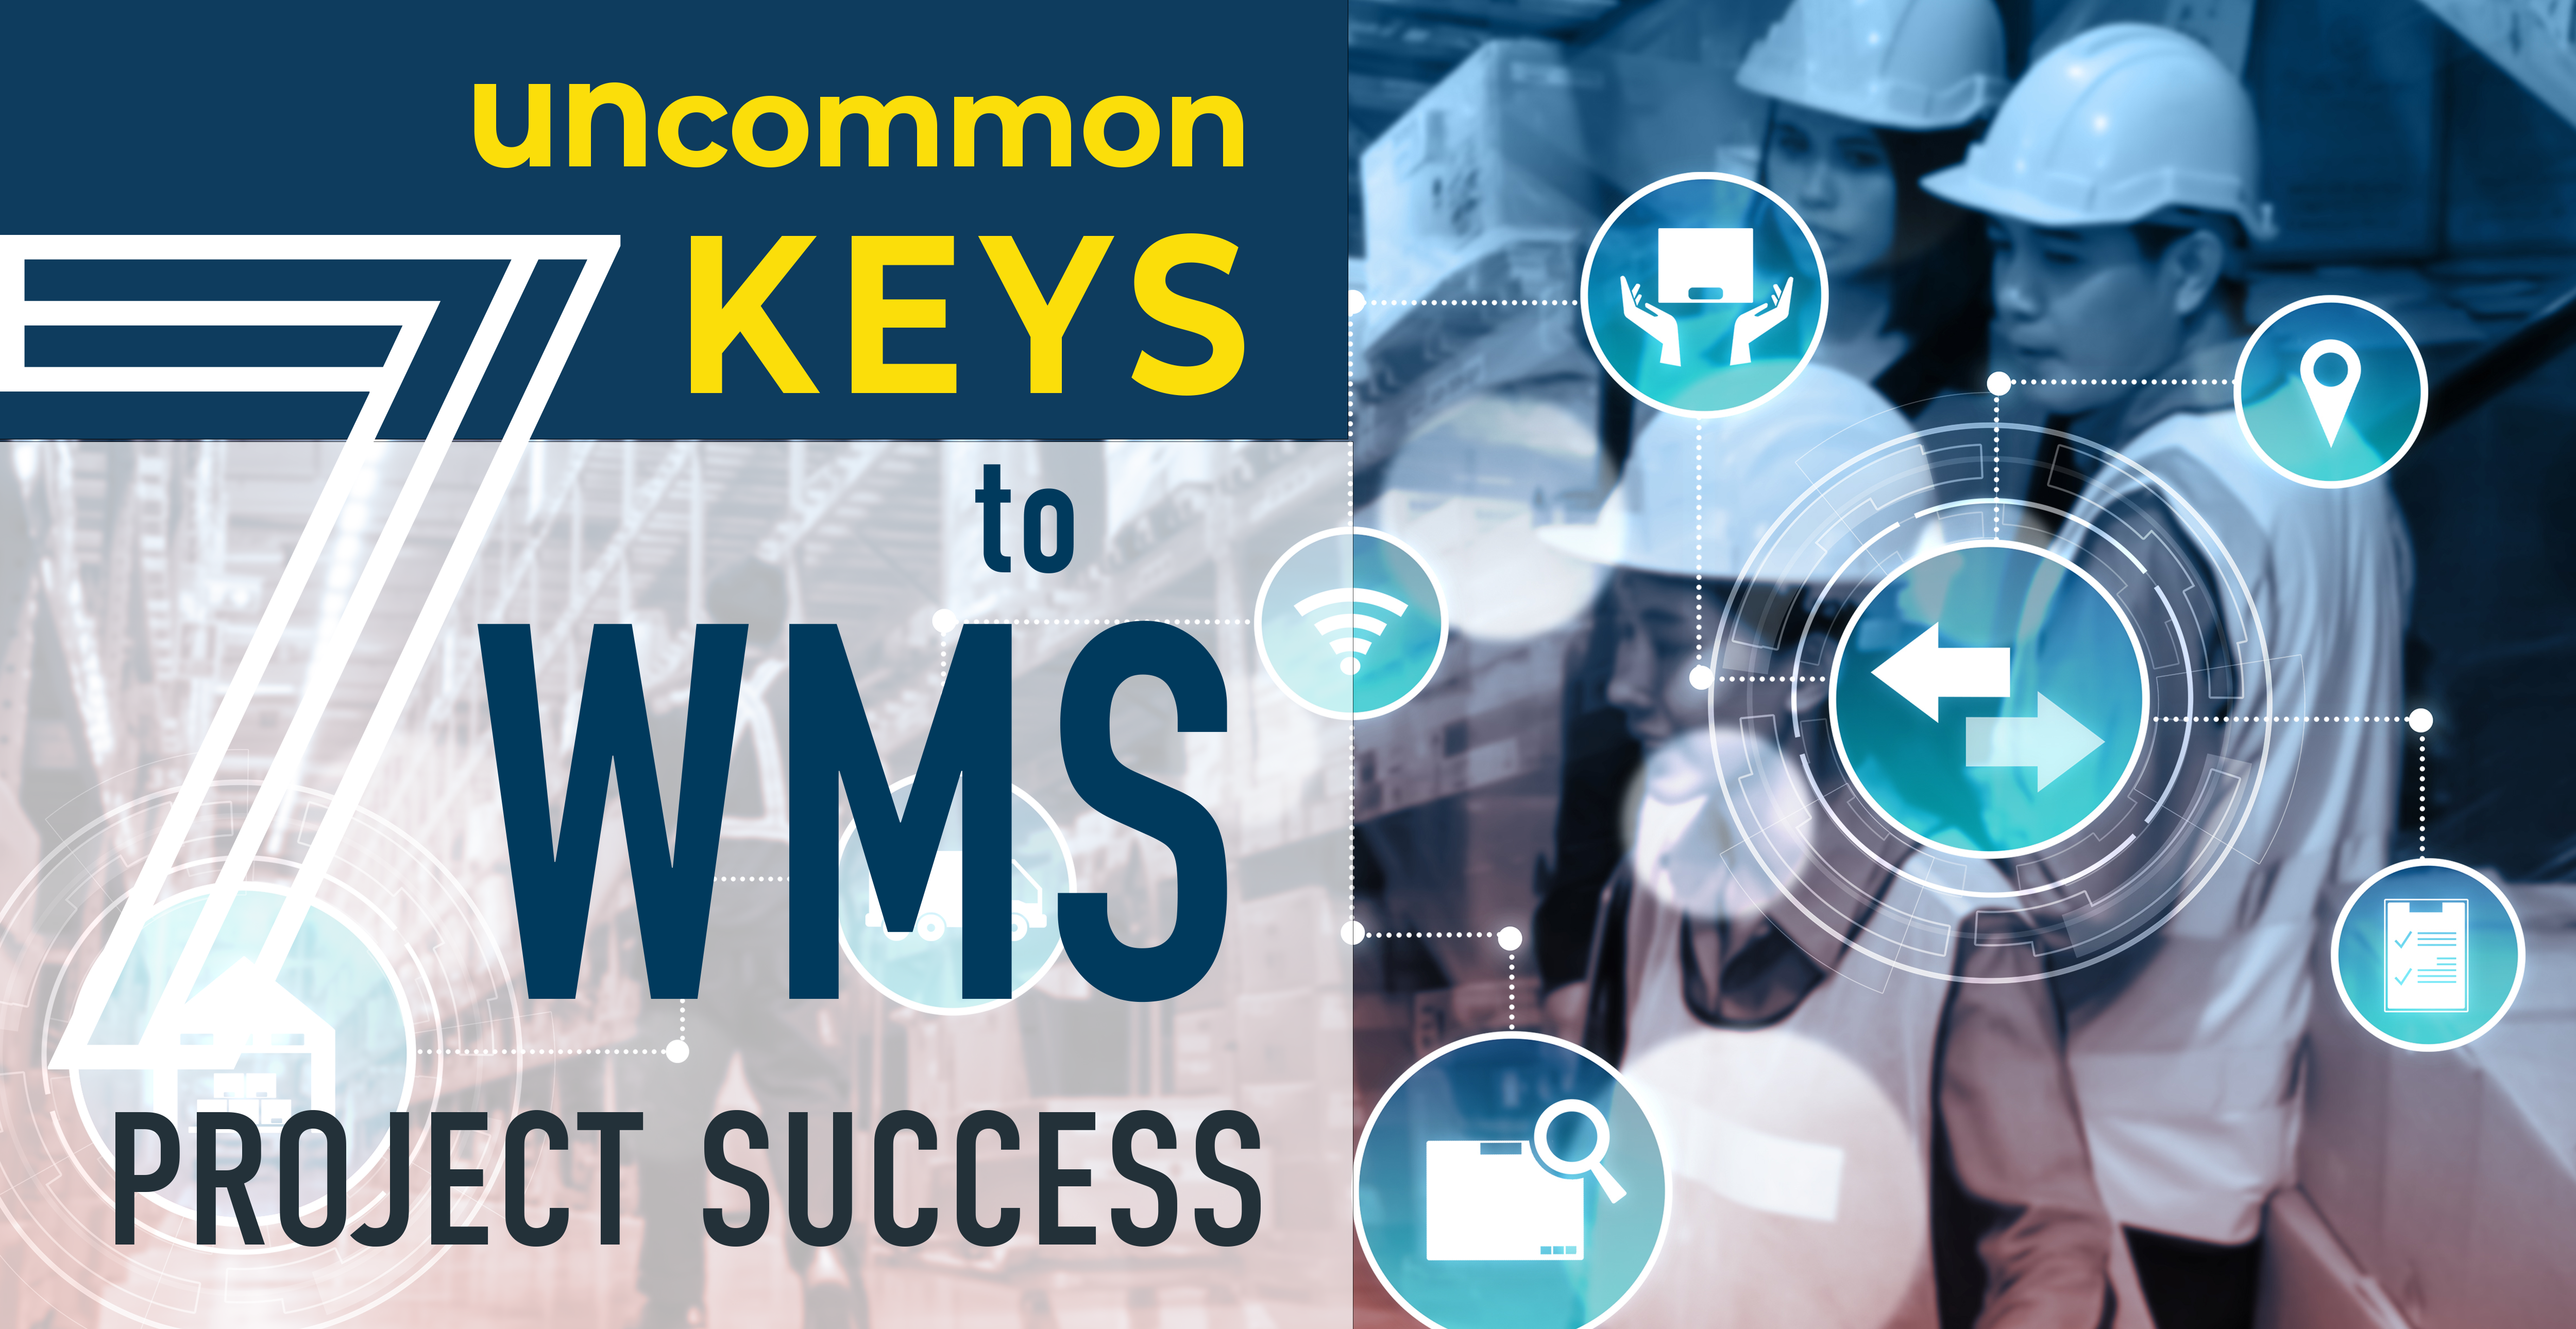 New Report from Softeon Identifies Seven Uncommon Keys to Warehouse Management System Success